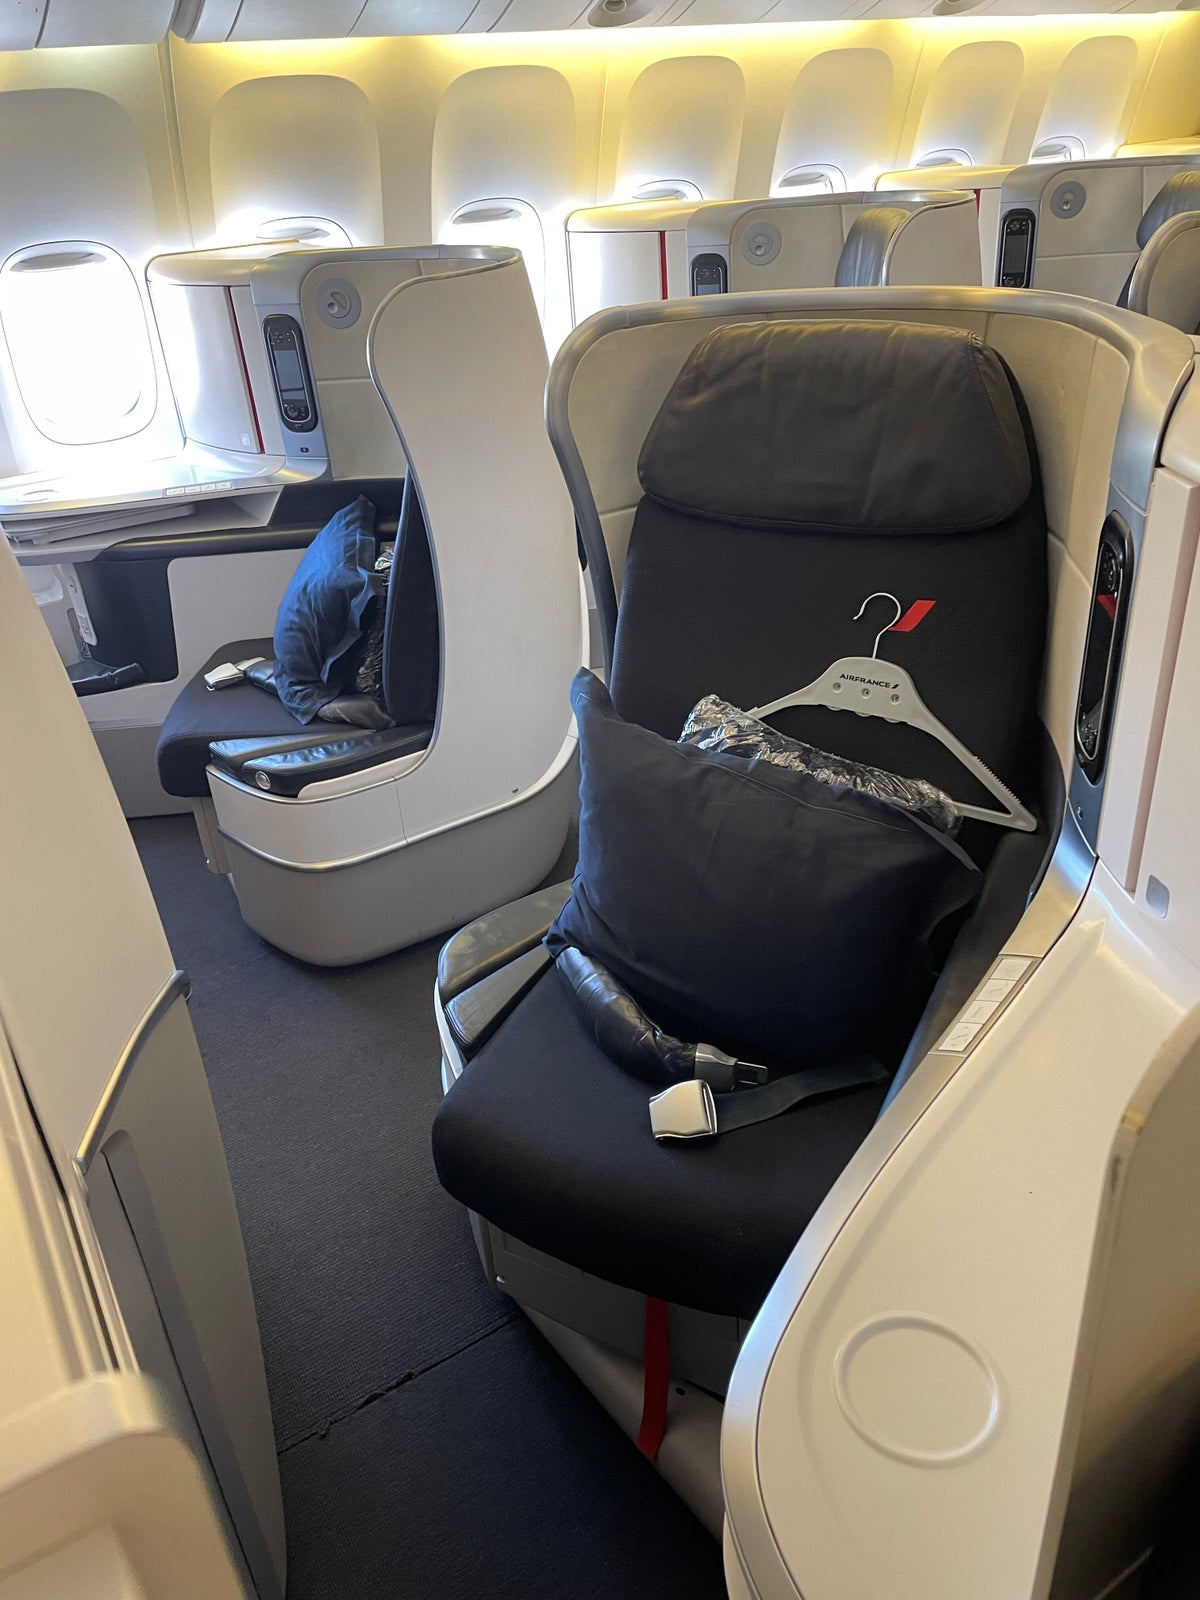 Air France Business Seat on a 777 300ER